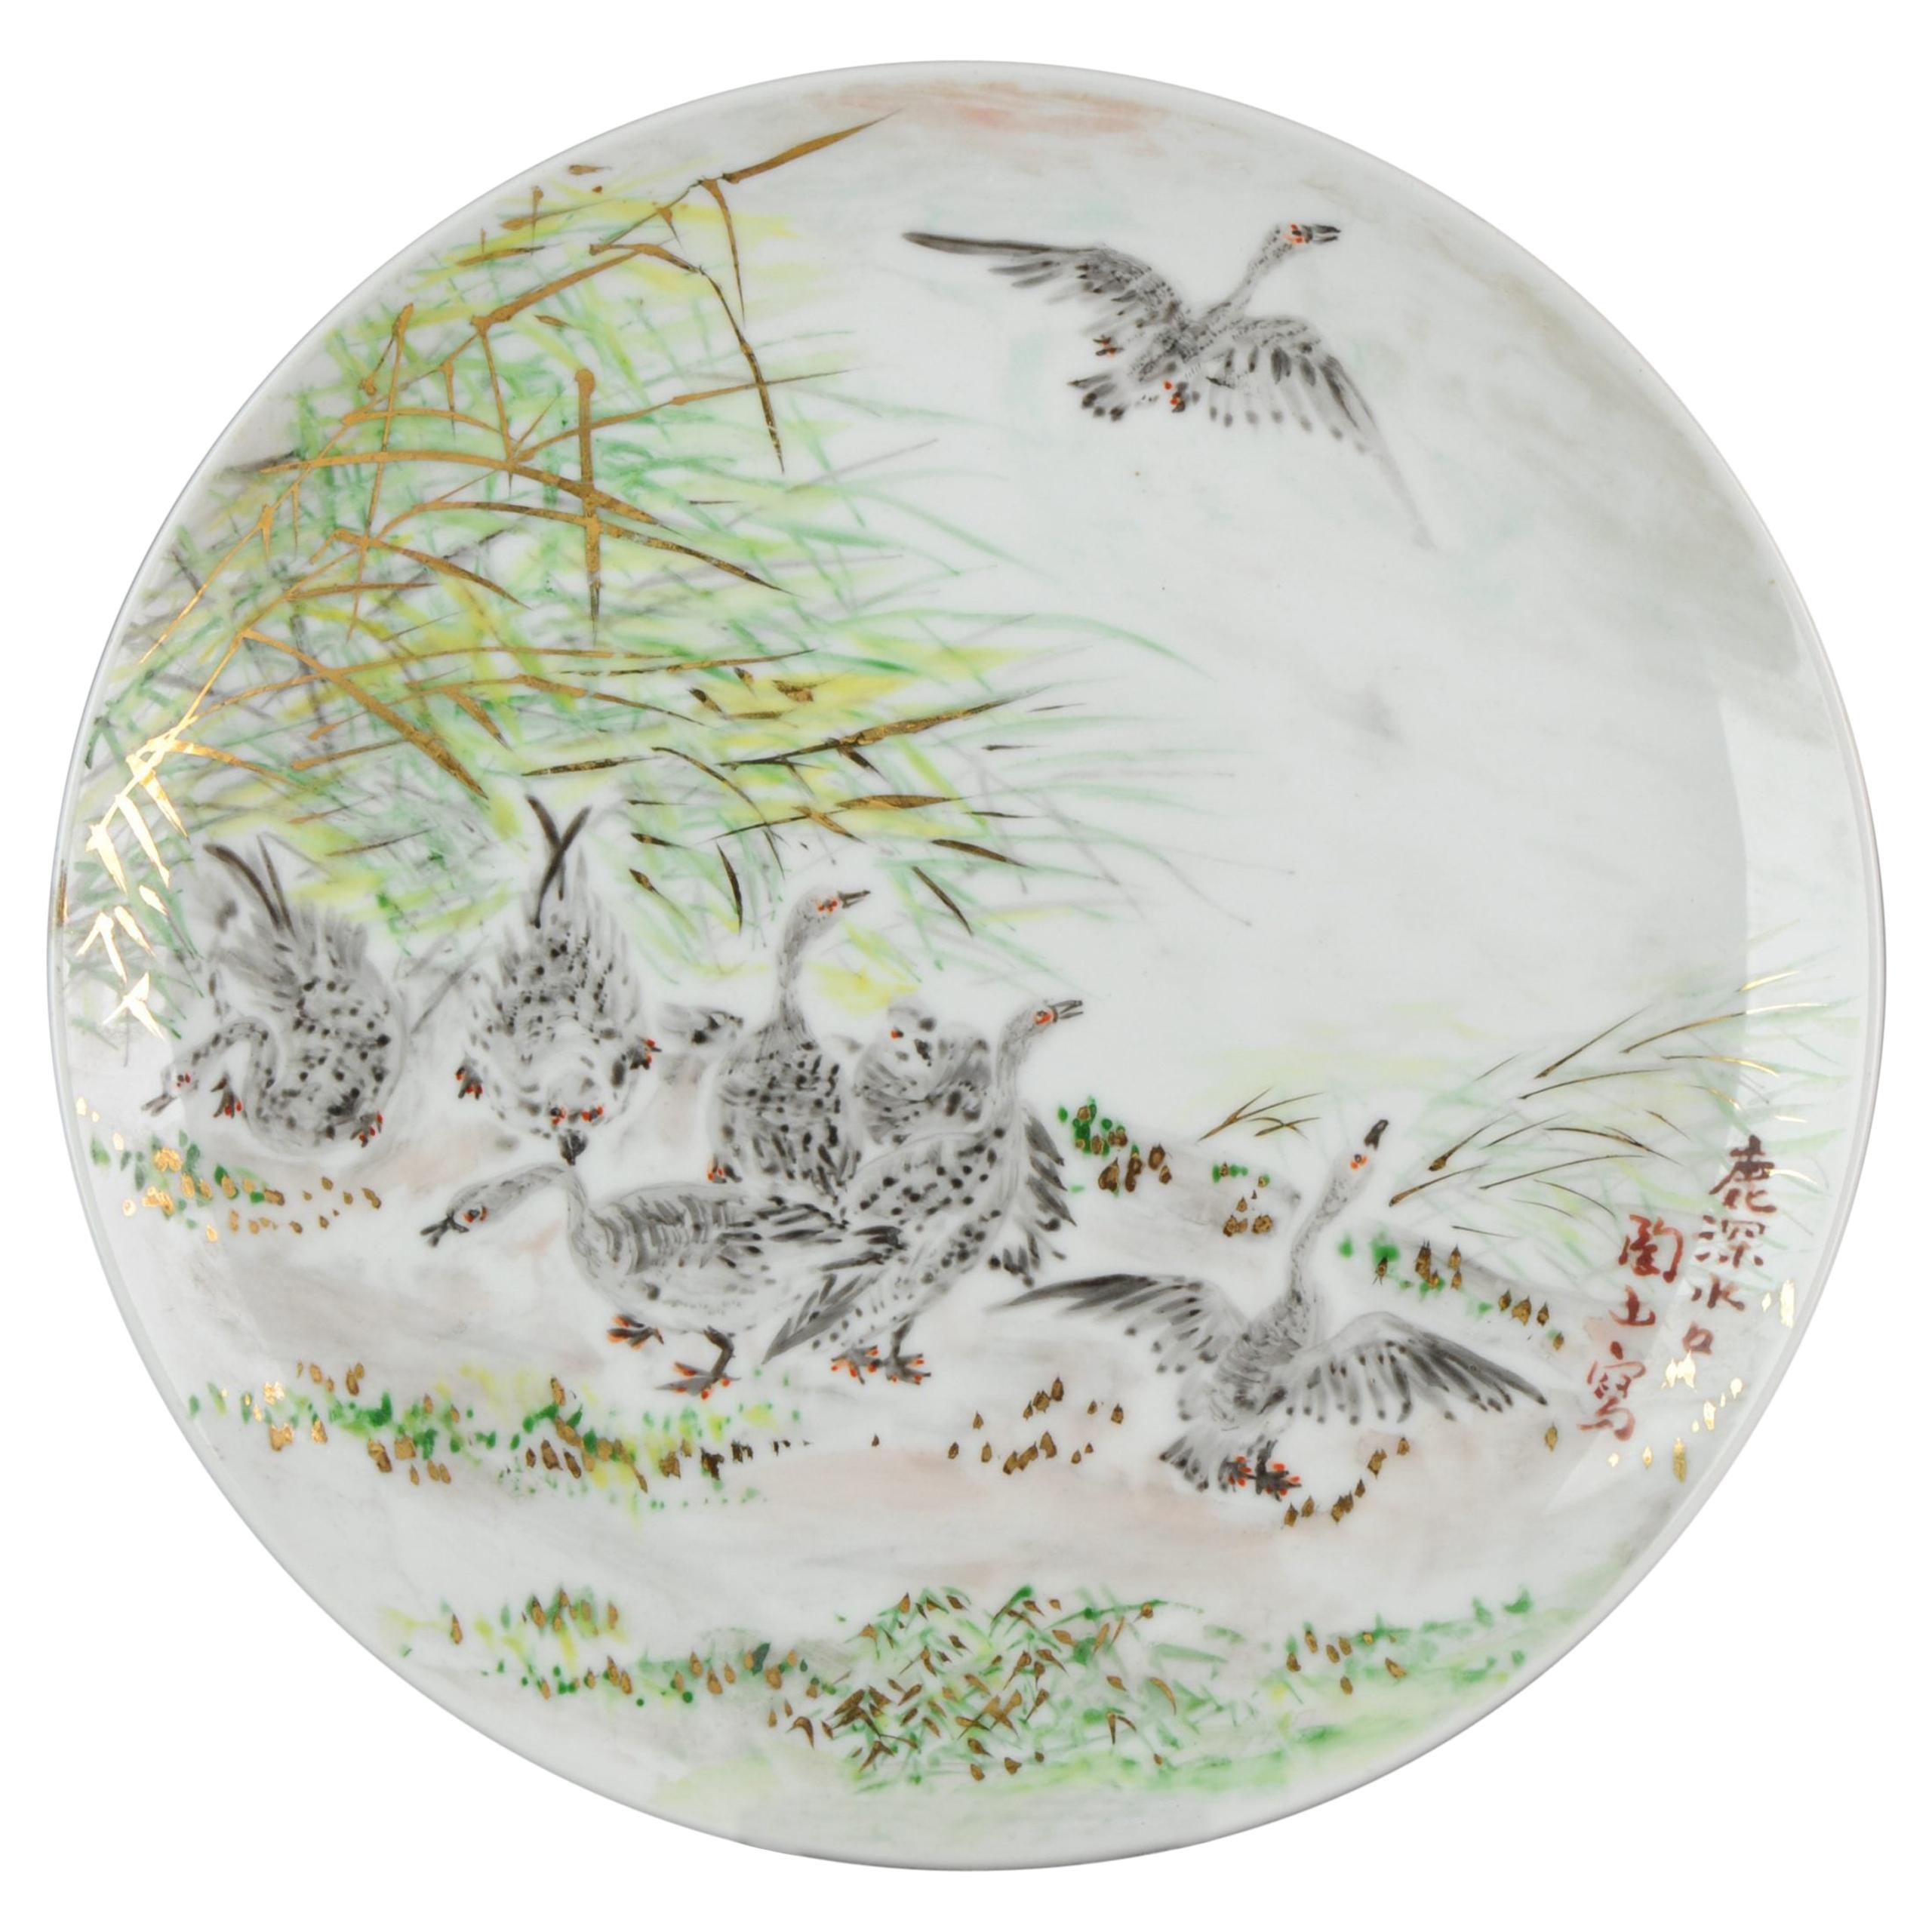 Perfect 20th-21st Century Japanese Porcelain Charger Birds Gooses in Landscape